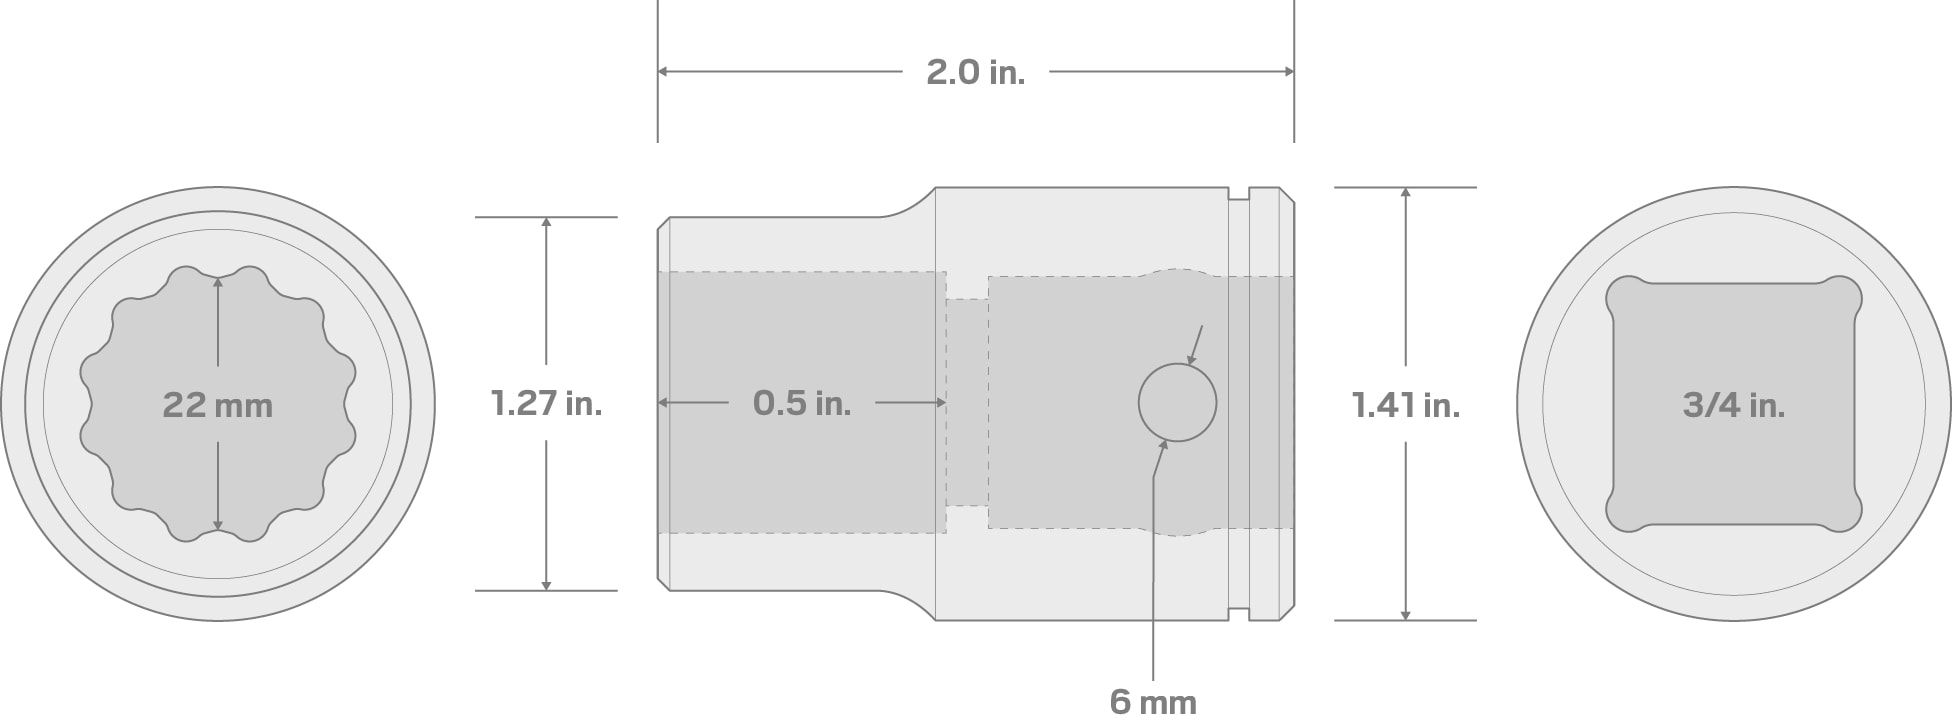 Specs for 3/4 Inch Drive x 22 mm 12-Point Socket